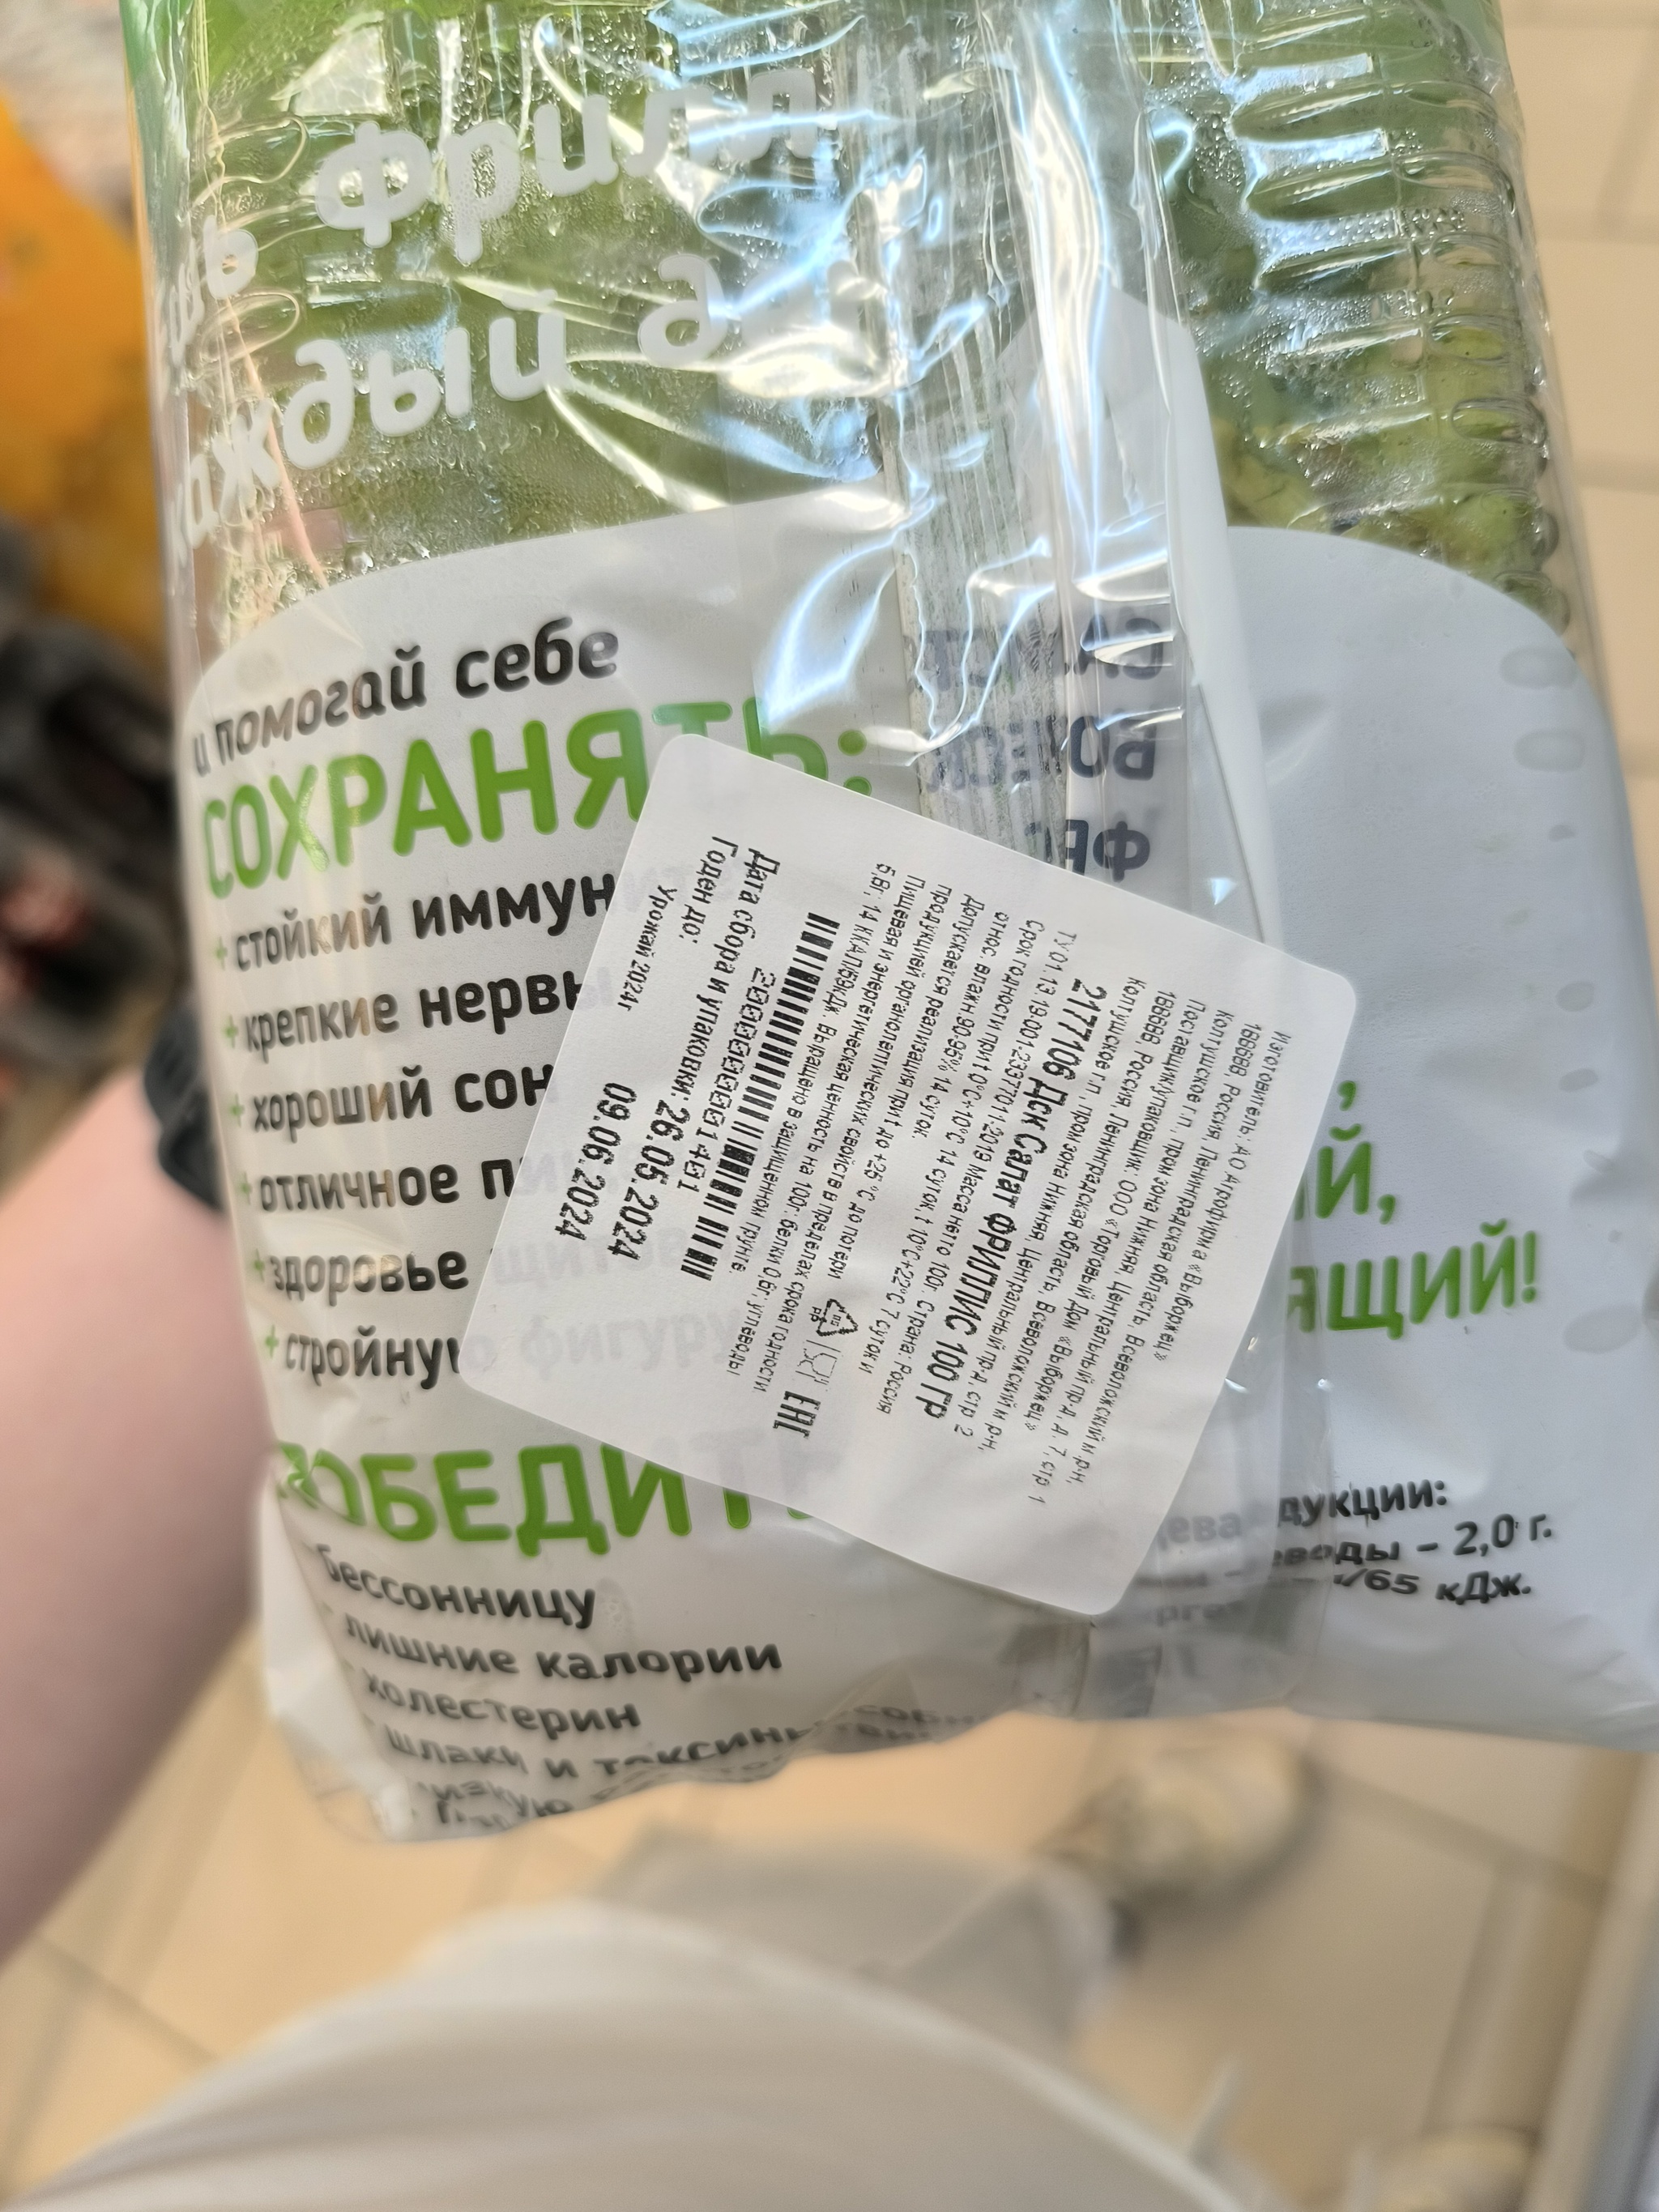 “Well, the greens are understandable, they’re expired” - “Pyaterochka” Sotsialisticheskaya str. 22 in the village of Metallostroy - My, A complaint, Cheating clients, Consumer rights Protection, Products, Delay, Pyaterochka, Prosecutor's office, Rospotrebnadzor, X5 Retail Group, Saint Petersburg, Purchase, Customer, Sellers and Buyers, Mystery shopper, Negative, Longpost